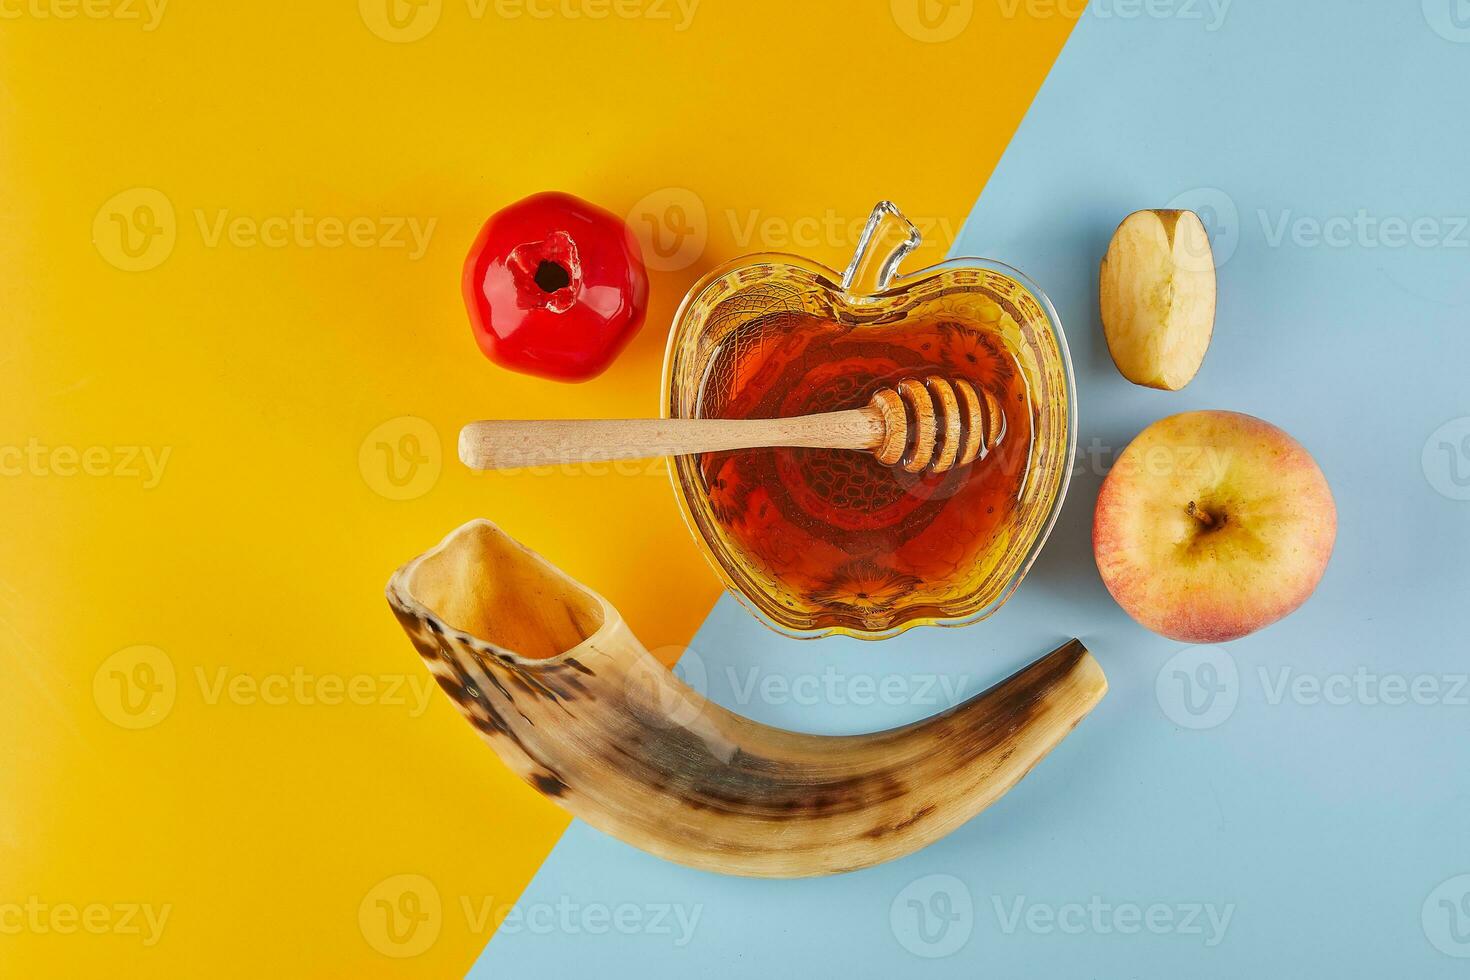 Rosh hashanah - jewish new year holiday concept. Bowl in the form of an apple with honey, apples, pomegranates, shofar on yellow-blue background photo